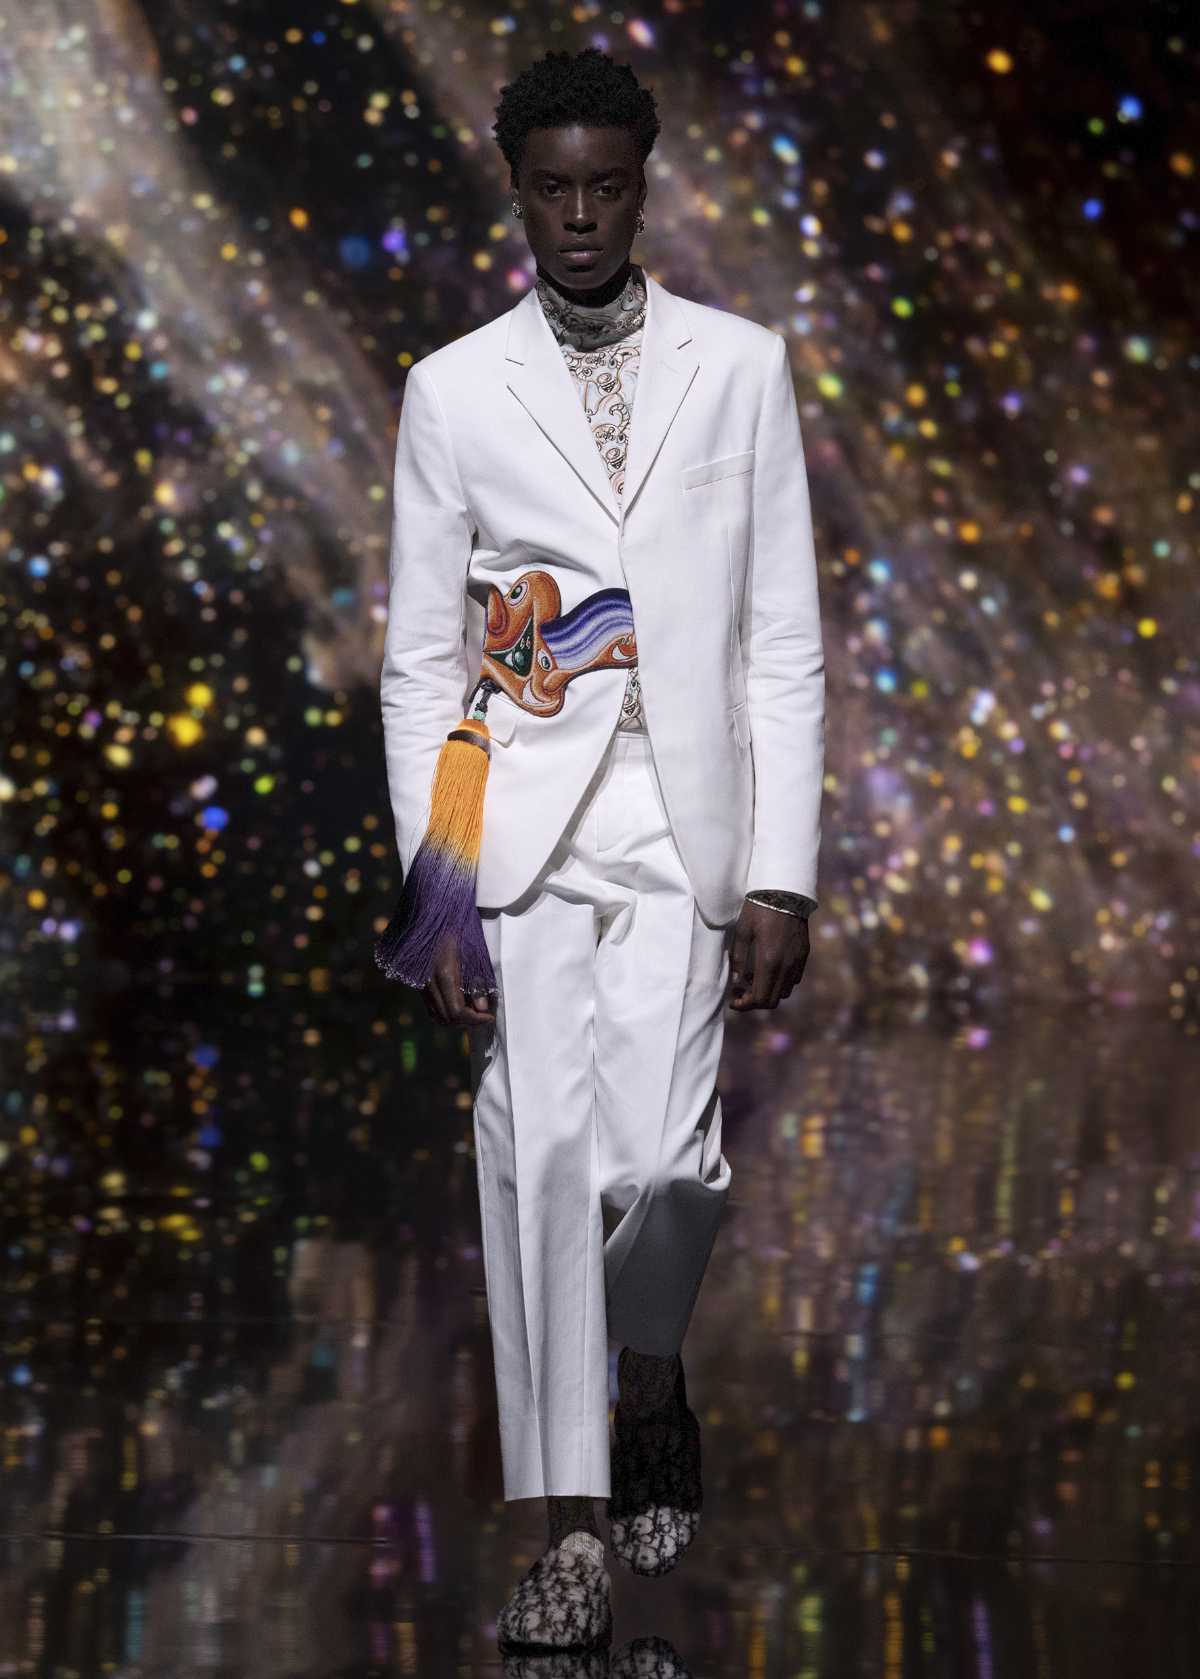 Dior Men's Fall 2021 Collection Mirrors the Evolution of the House in the 21st Century